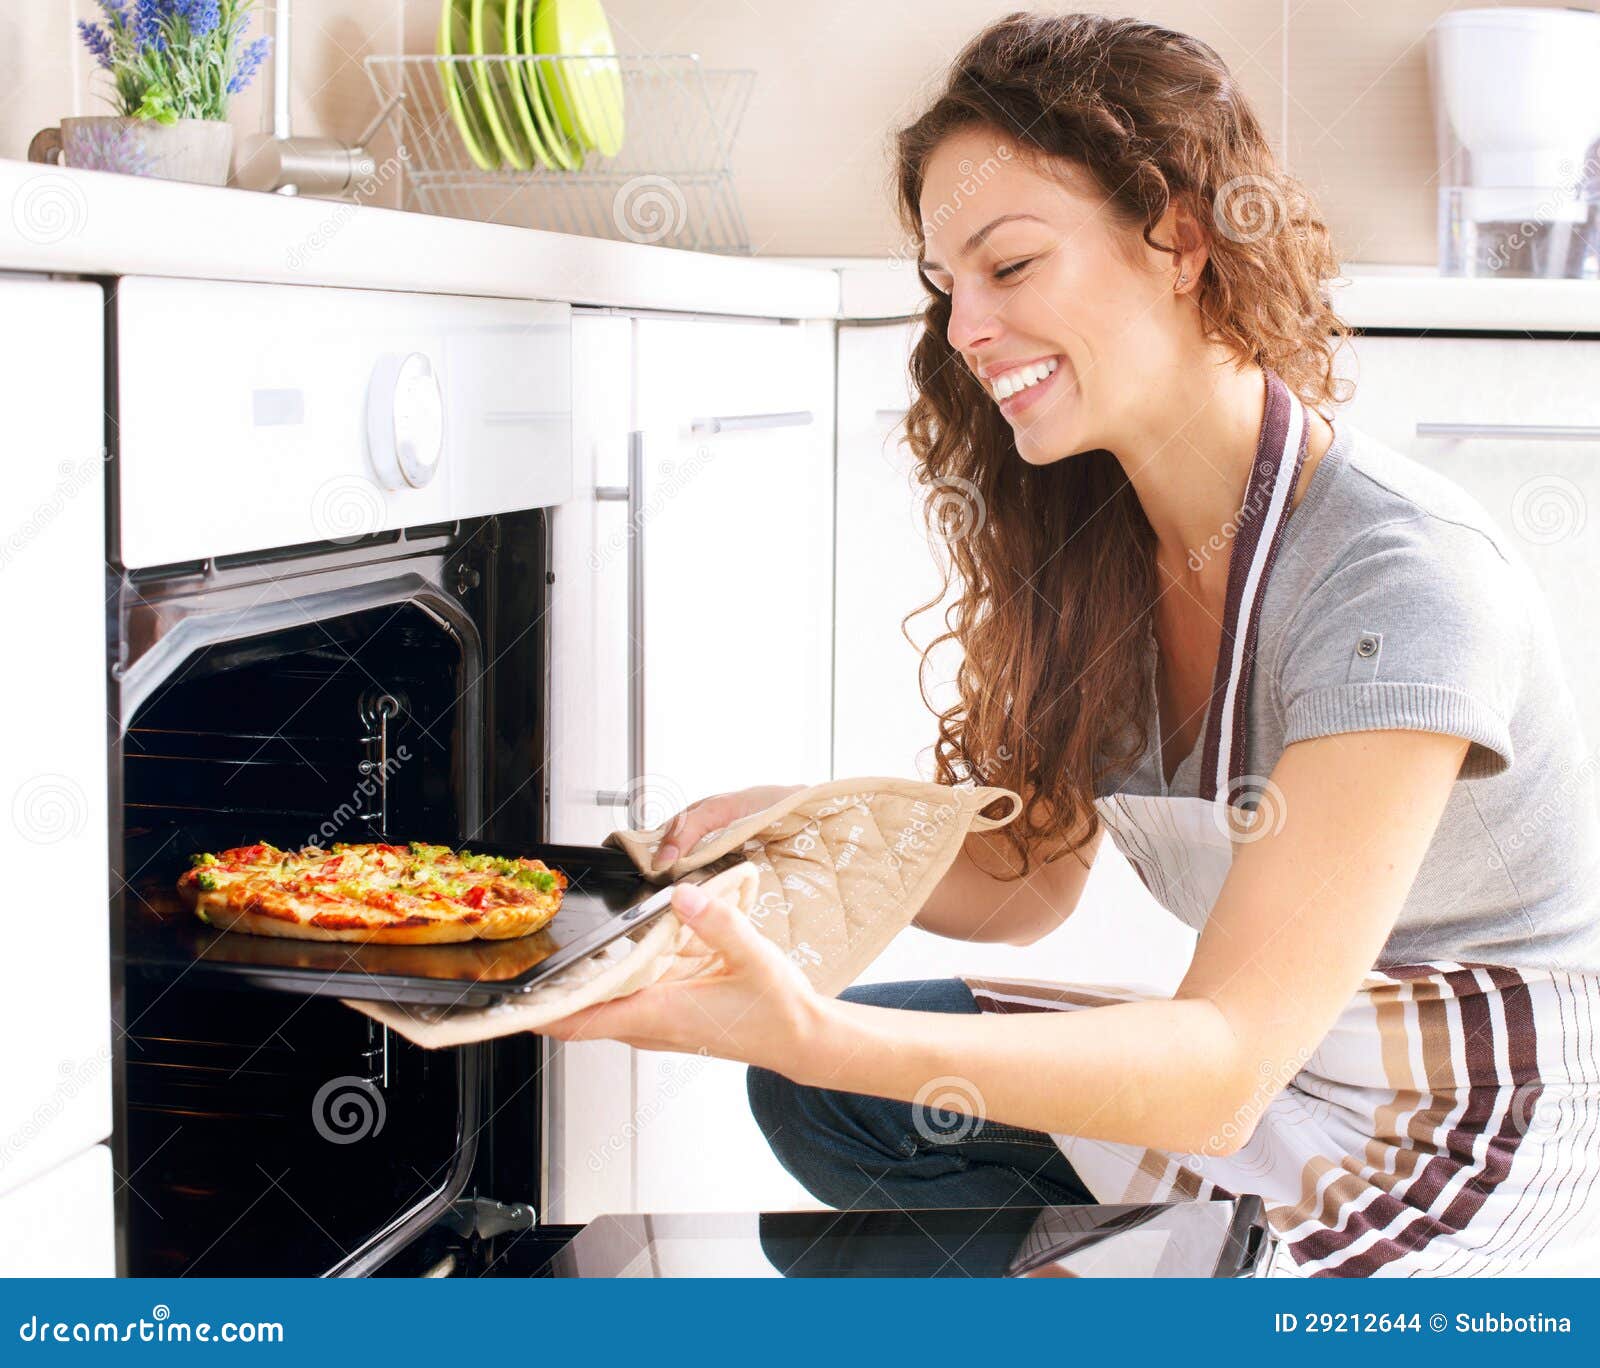 woman cooking pizza